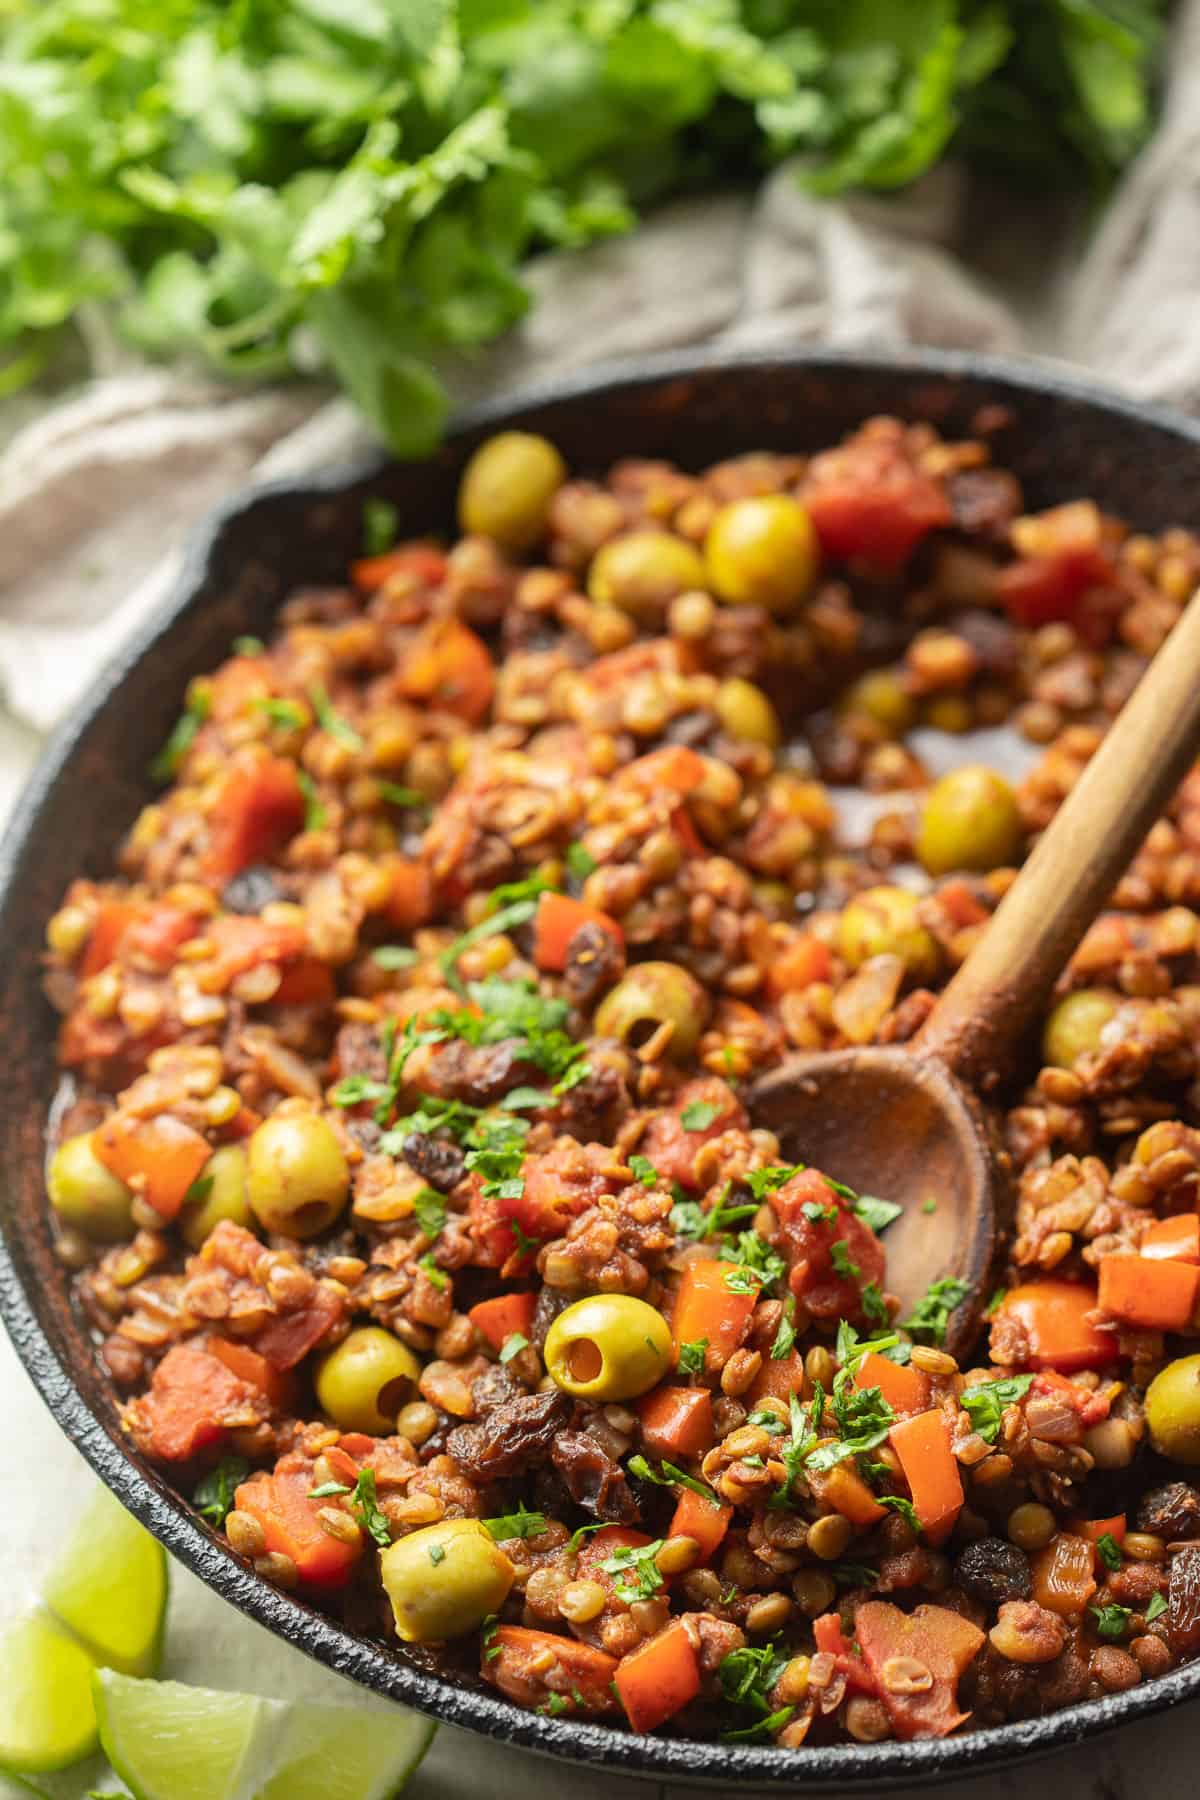 Skillet of Vegan Picadillo with a wooden spoon.